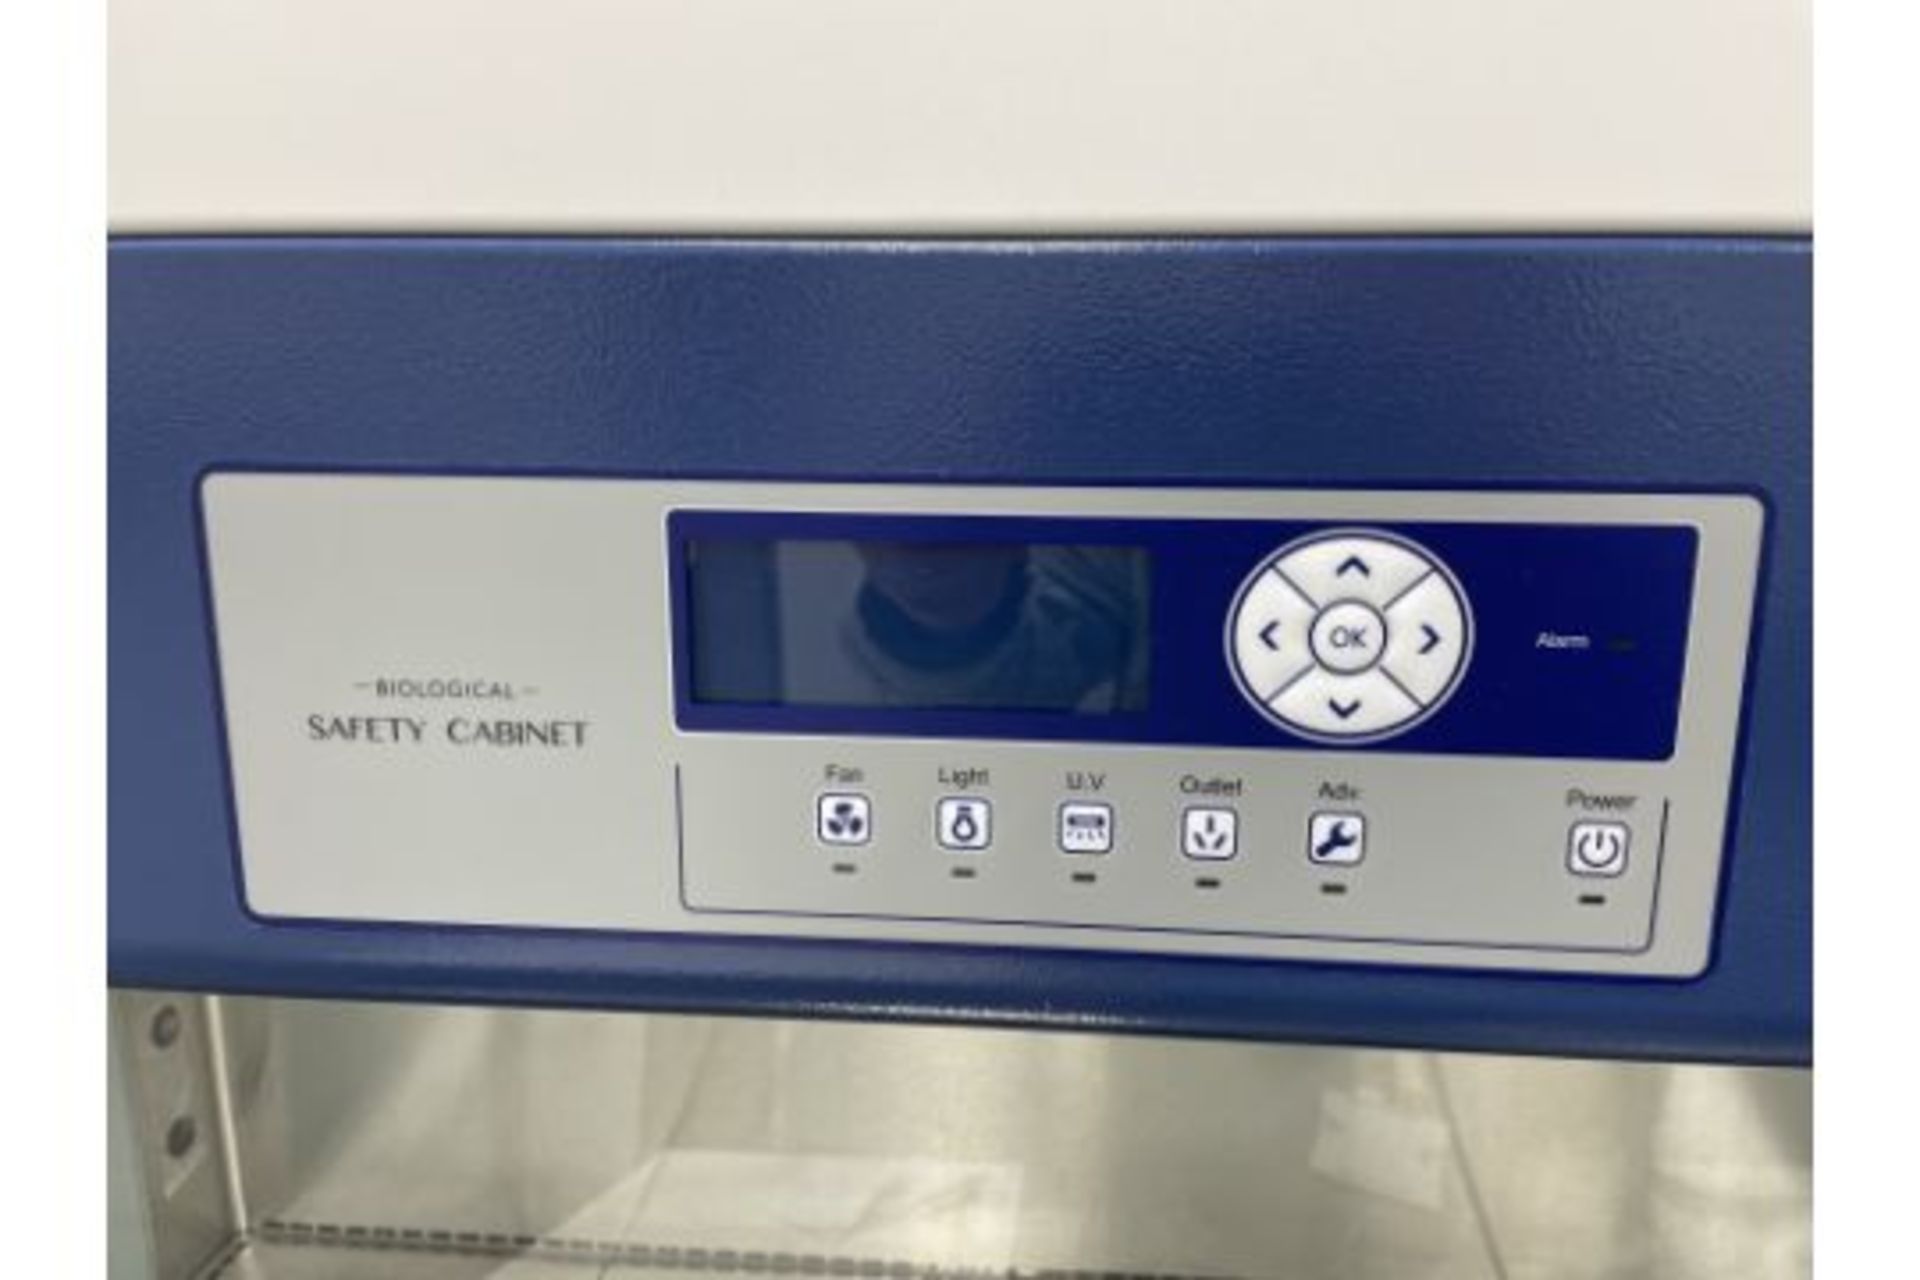 HAIER BIOMEDICAL HR1200-IIA2 BIOLOGICAL SAFETY CABINET - Image 2 of 3